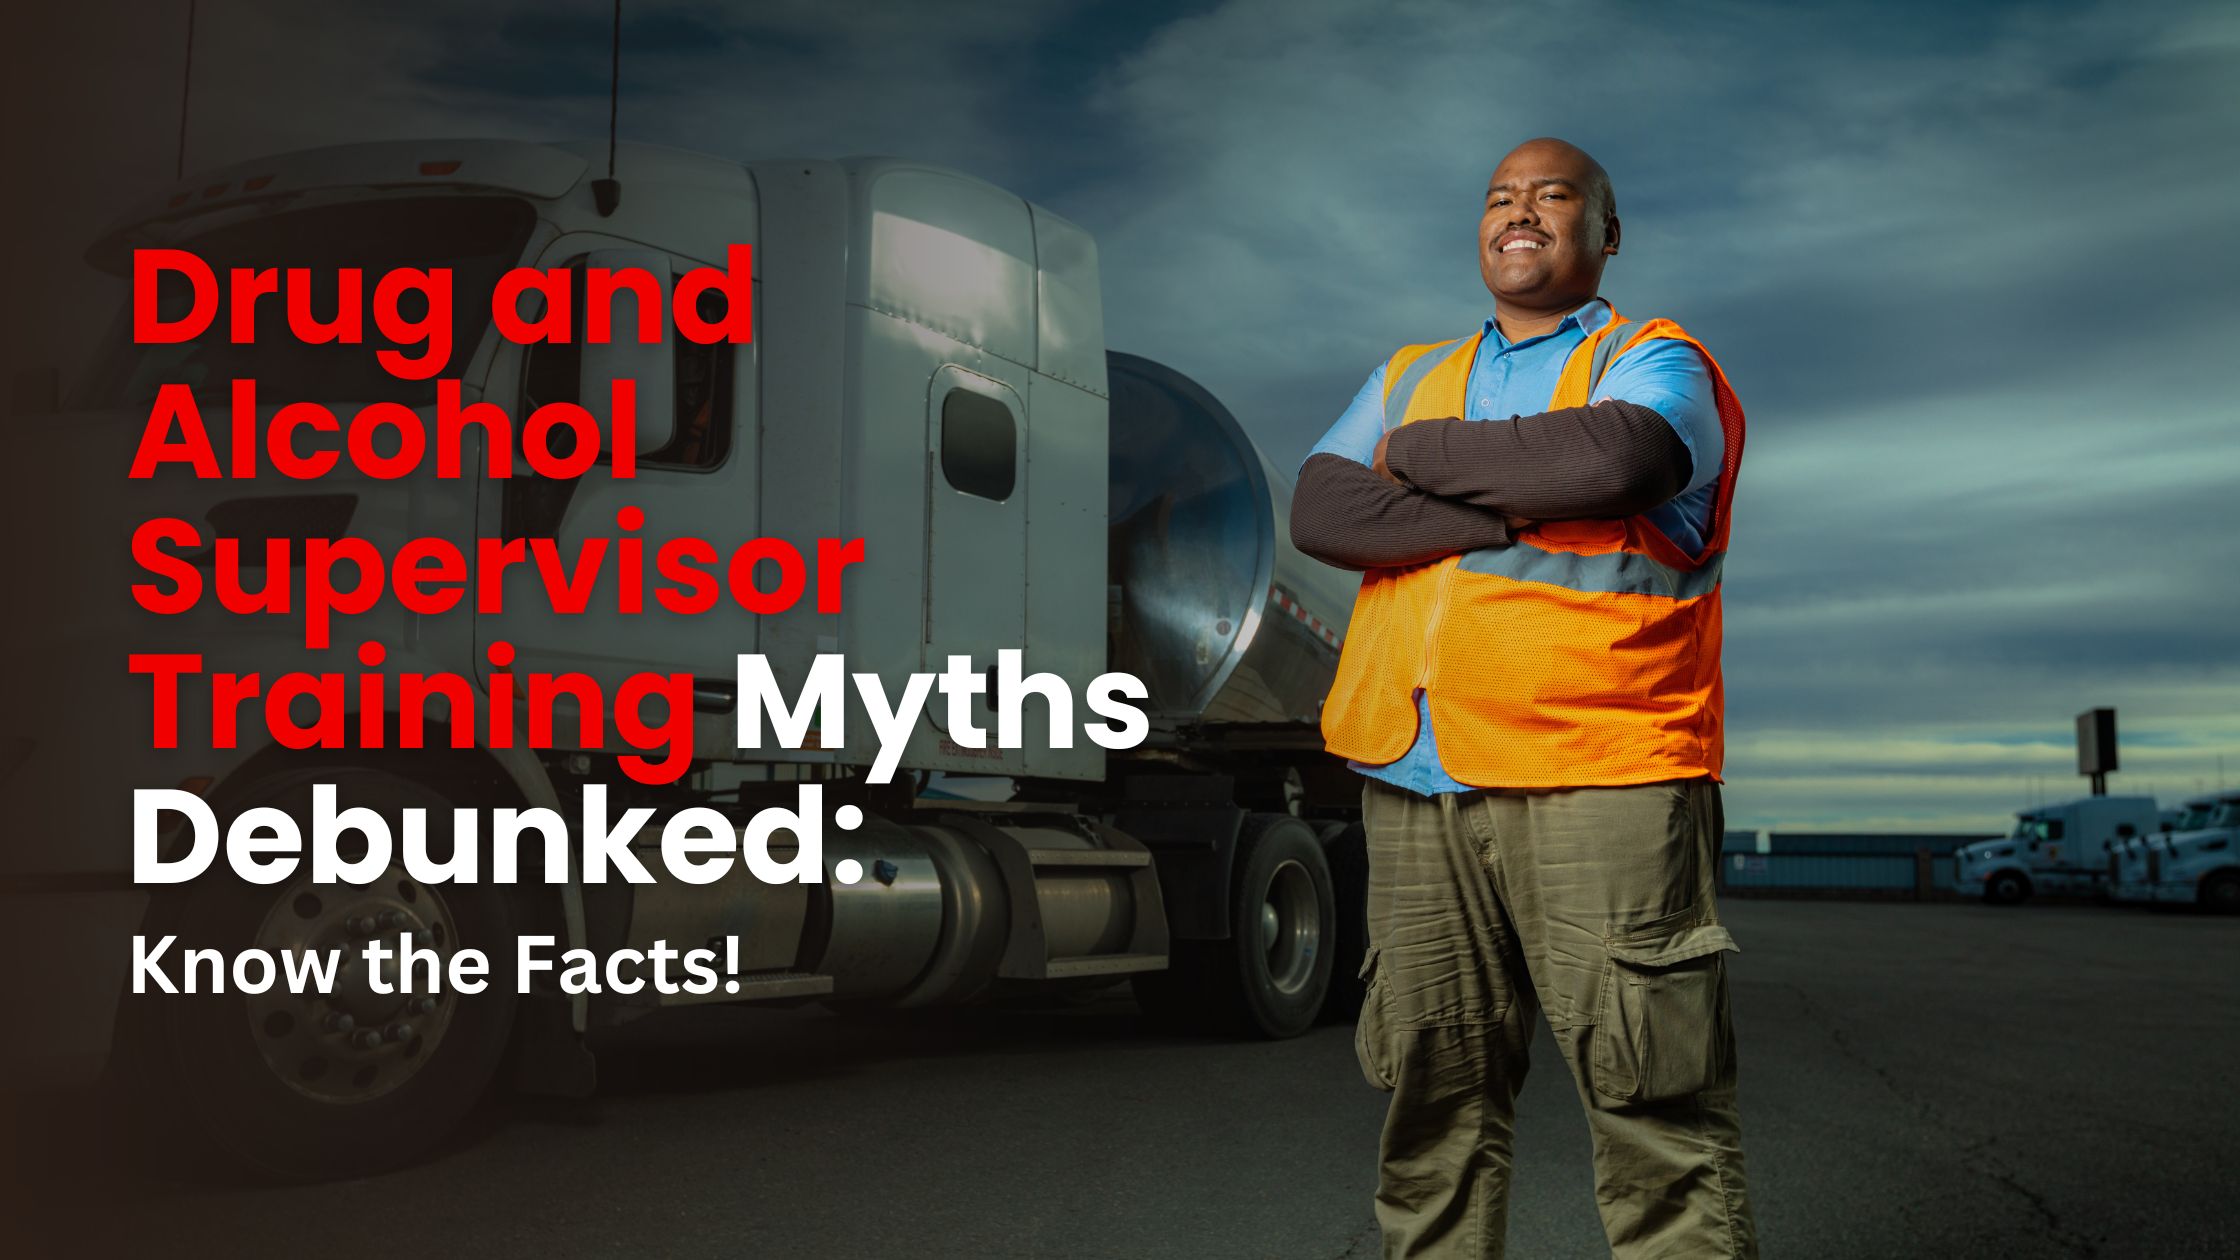 Drug and Alcohol Supervisor Training Myths Debunked: Know the Facts!